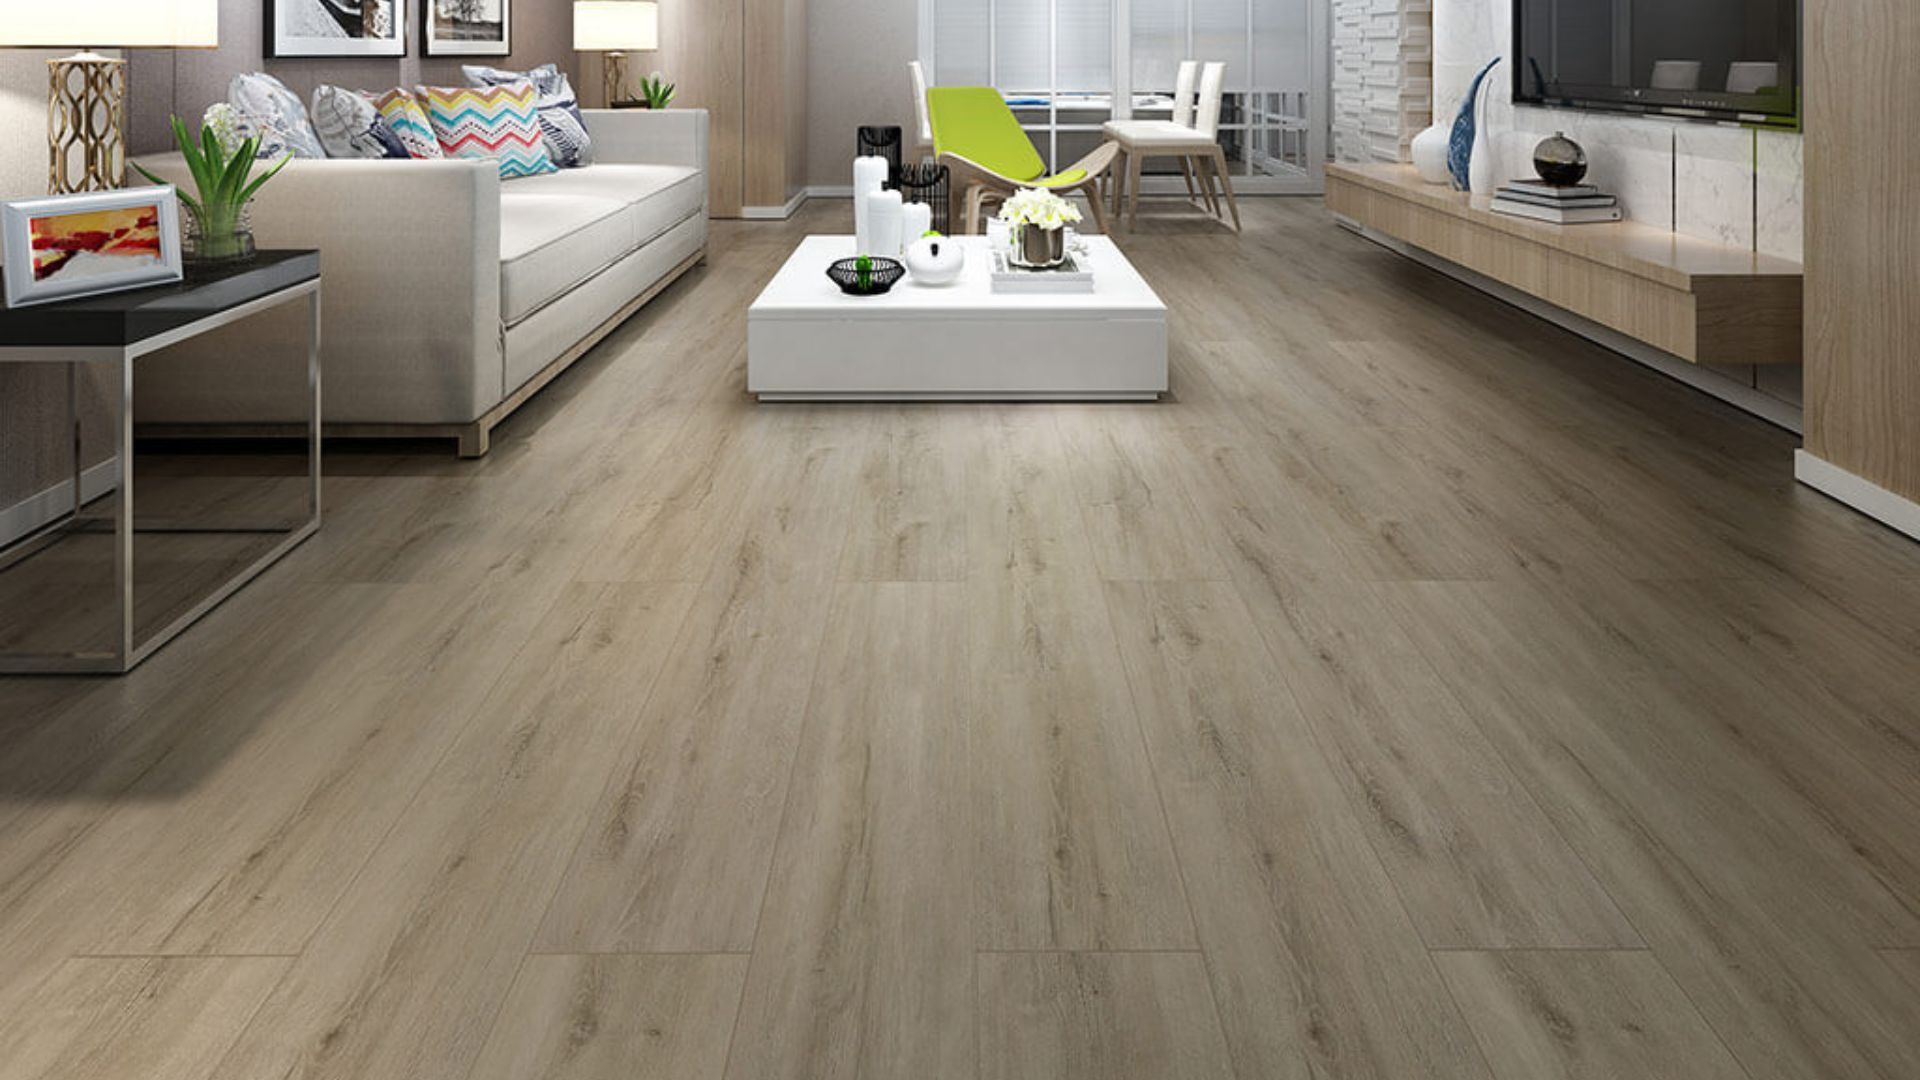 Why SPC Flooring is thе Idеal Choicе for Your Dubai Homе